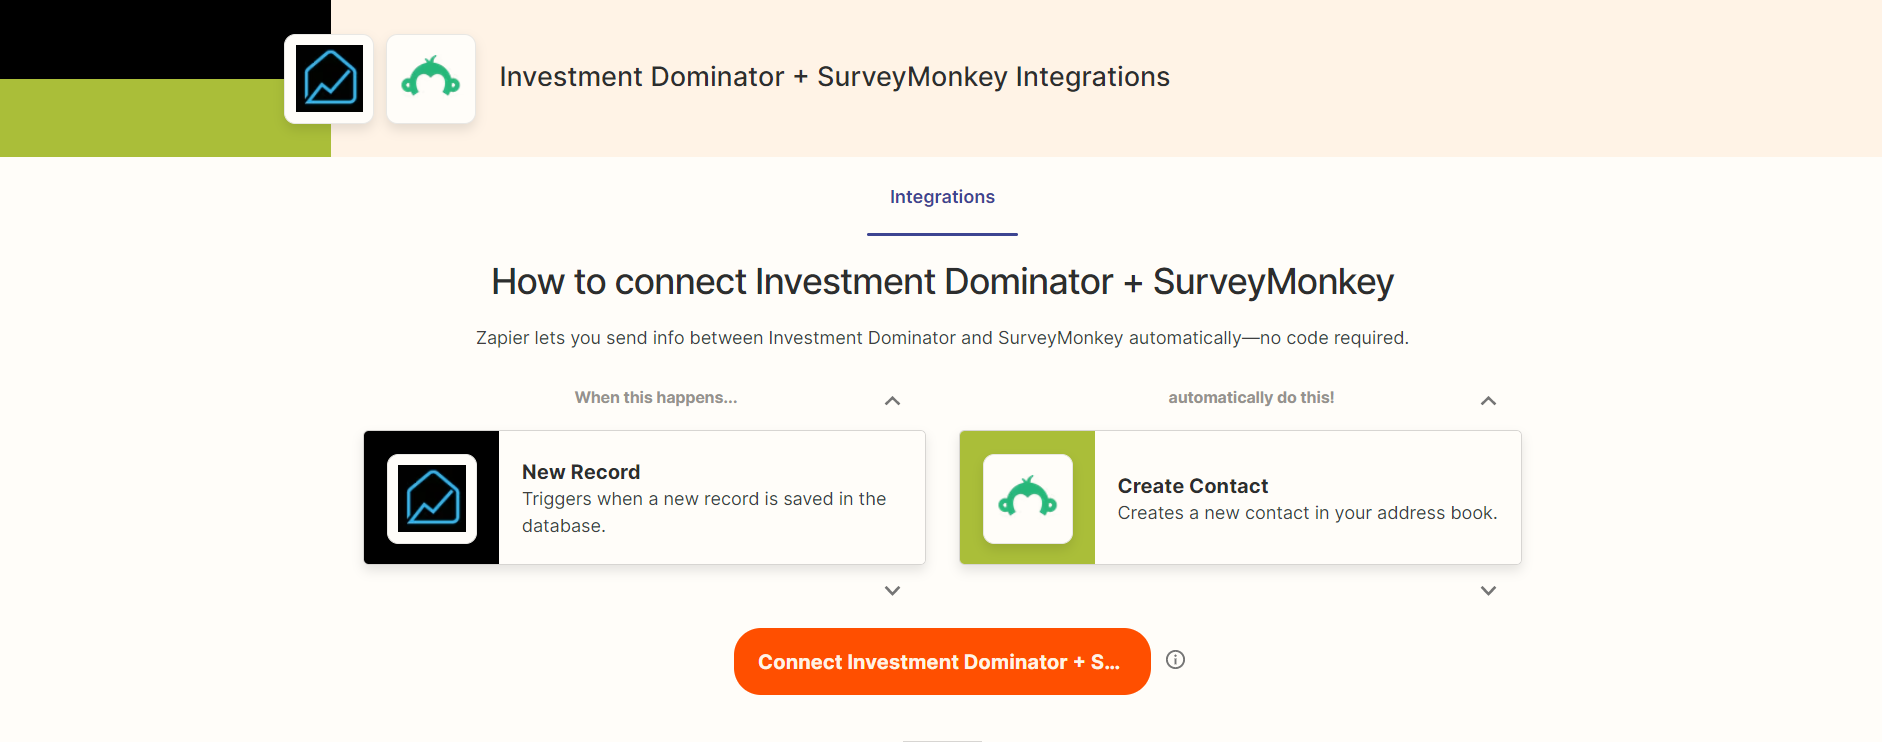 Zapier: How To Connect The Investment Dominator To SurveyMonkey